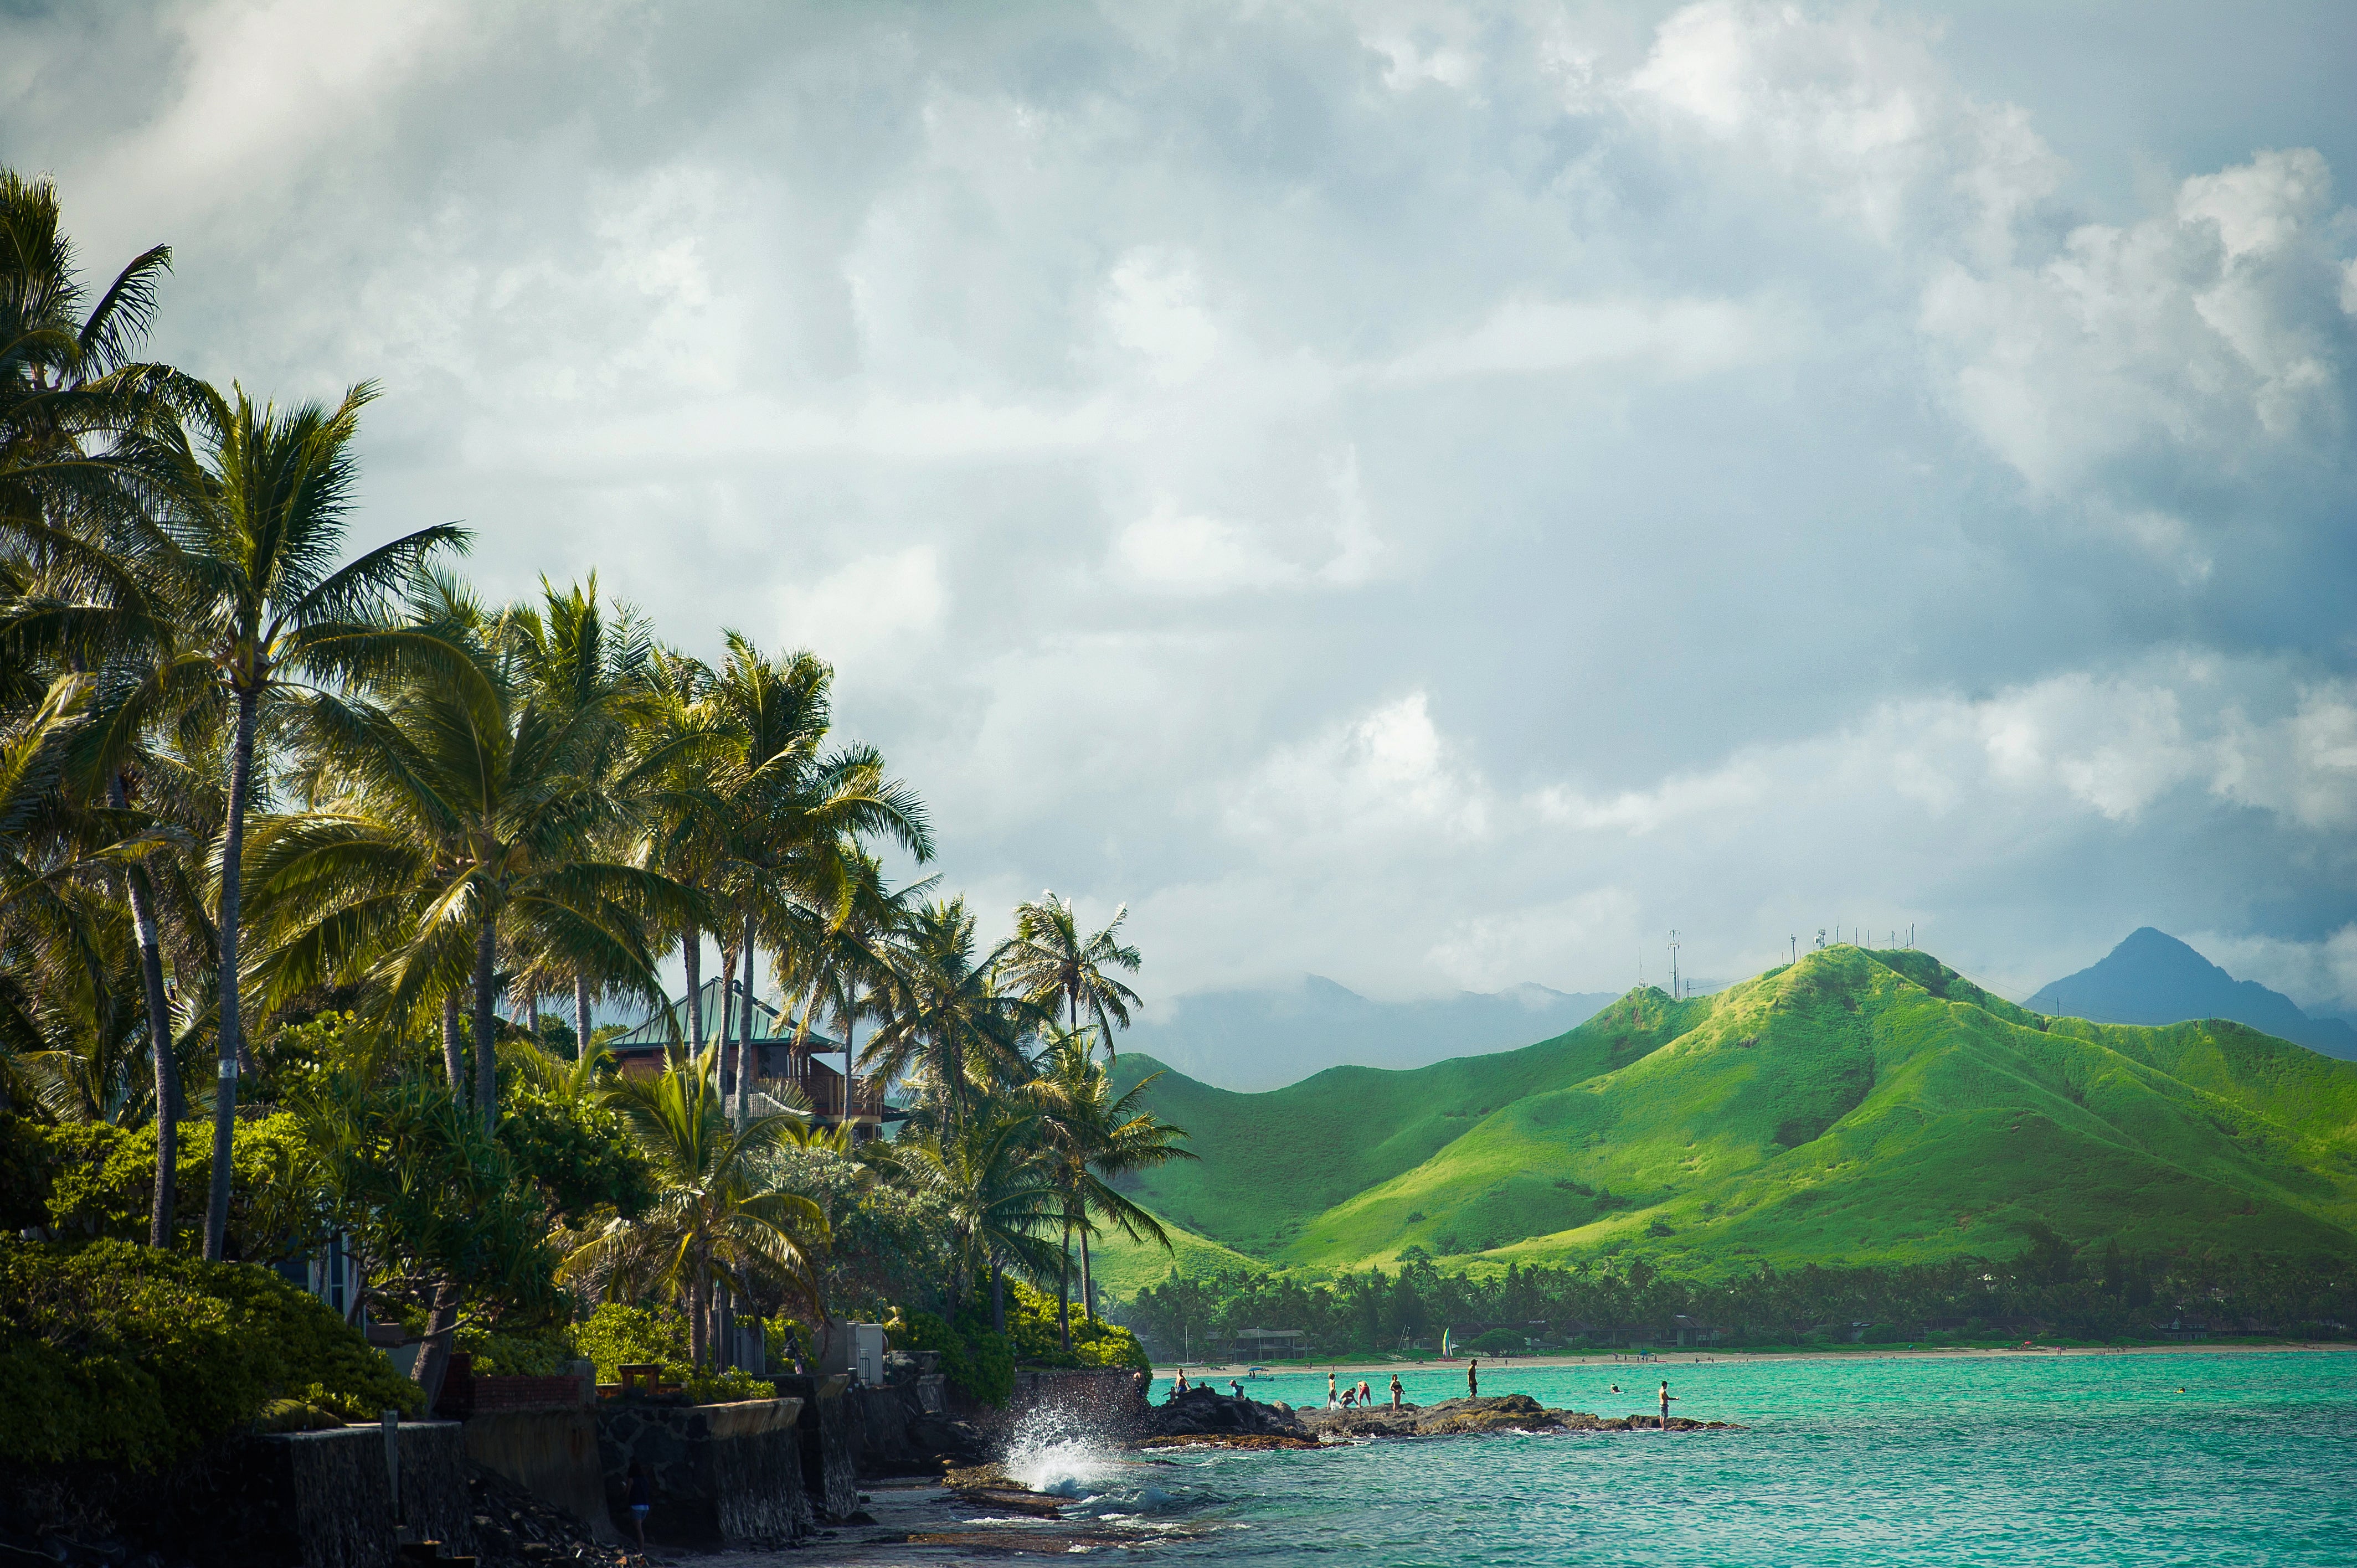 The peaceful bay looks out onto the nearby Mokulu Islands